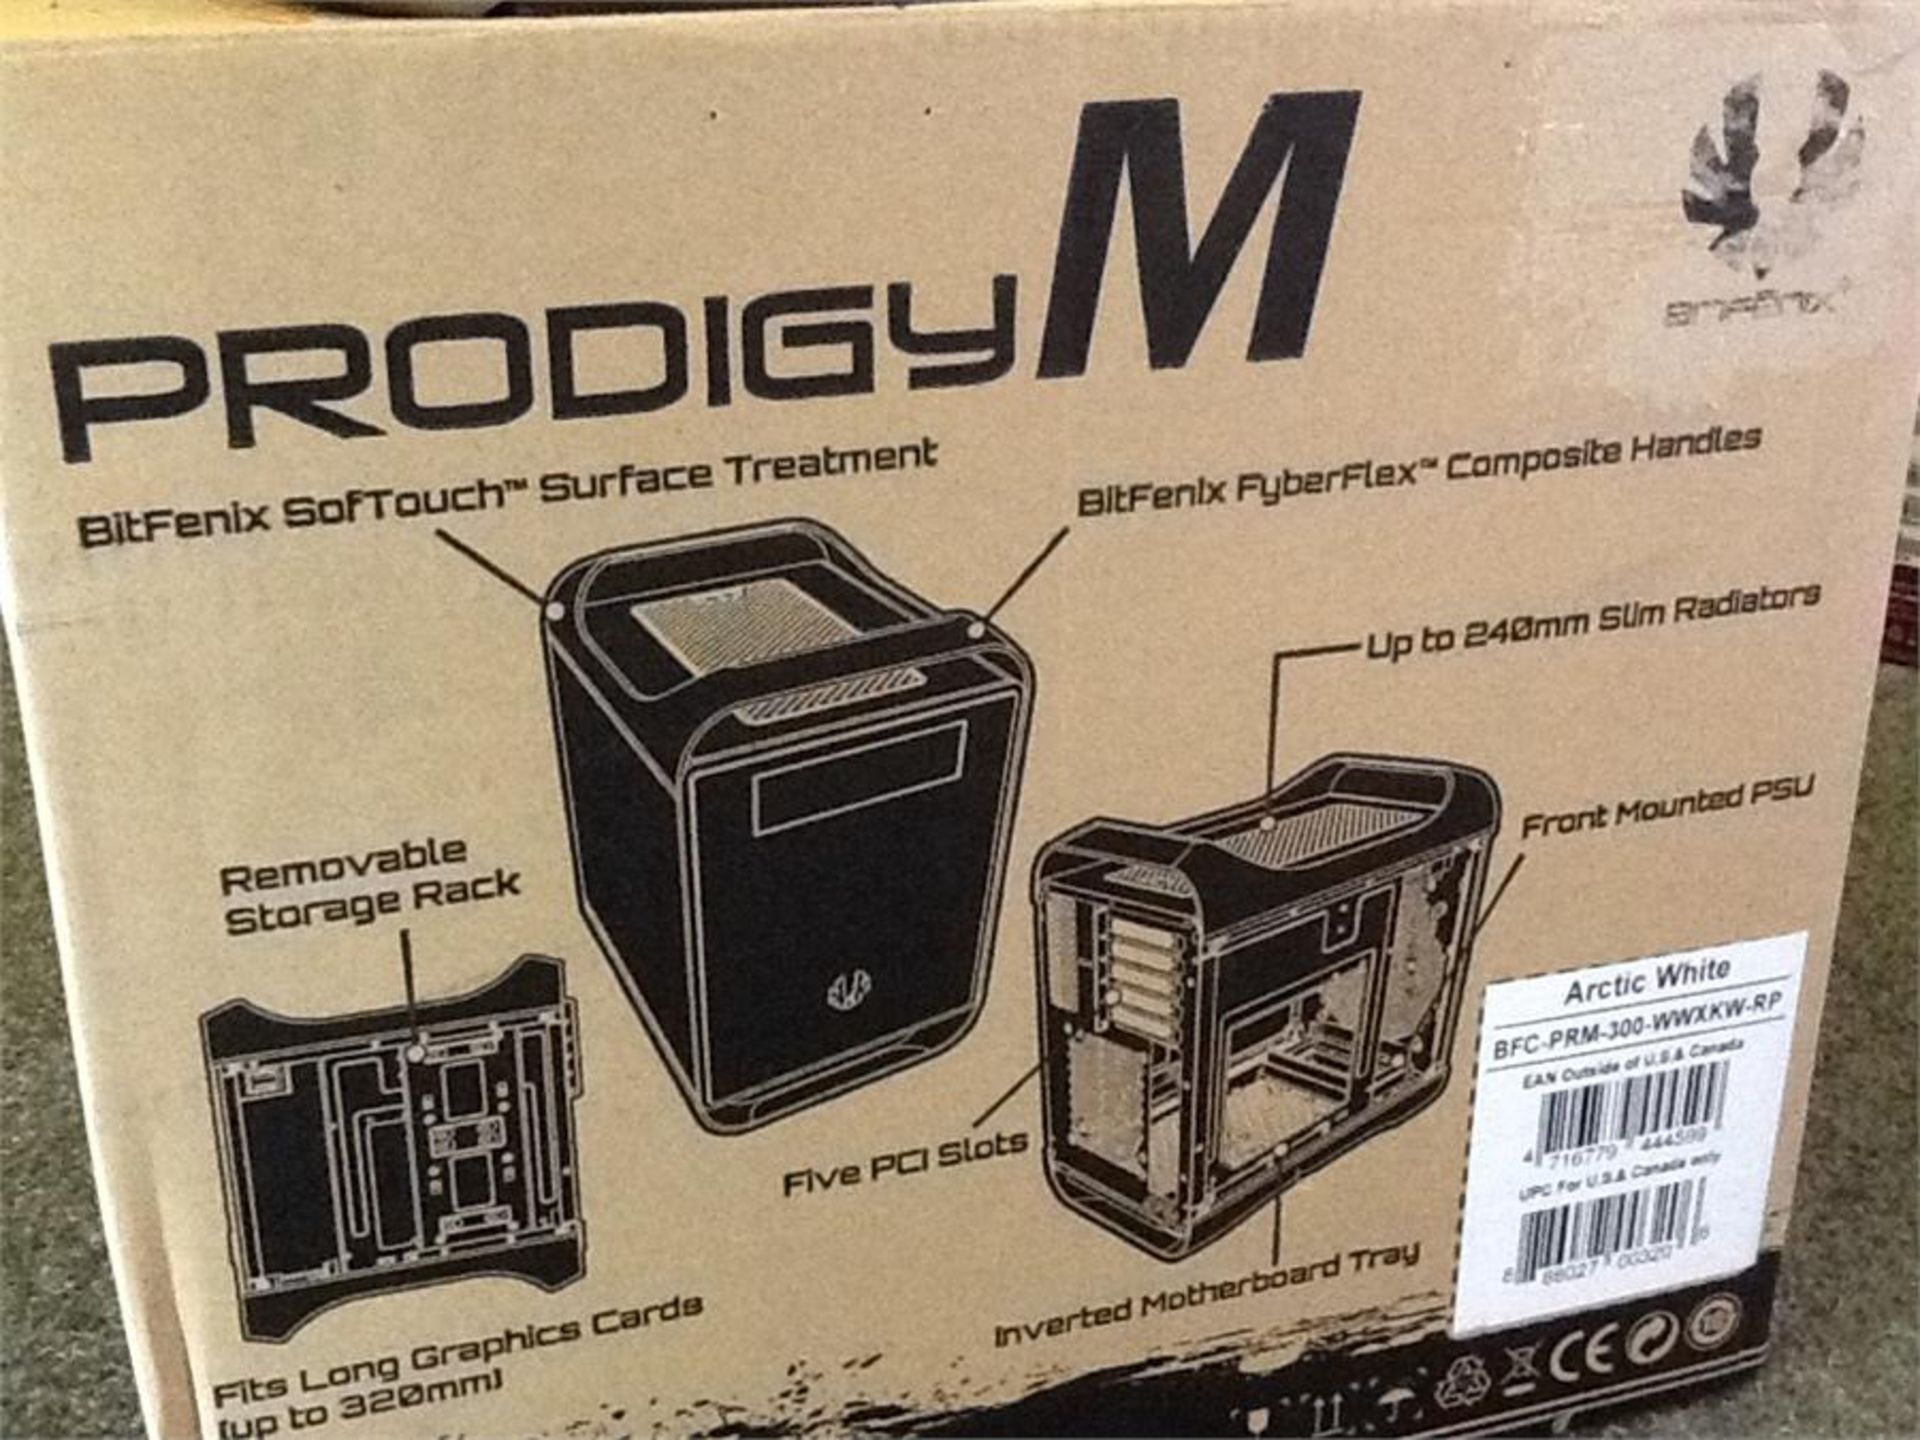 Prodigy M computer case, boxed - Image 4 of 10